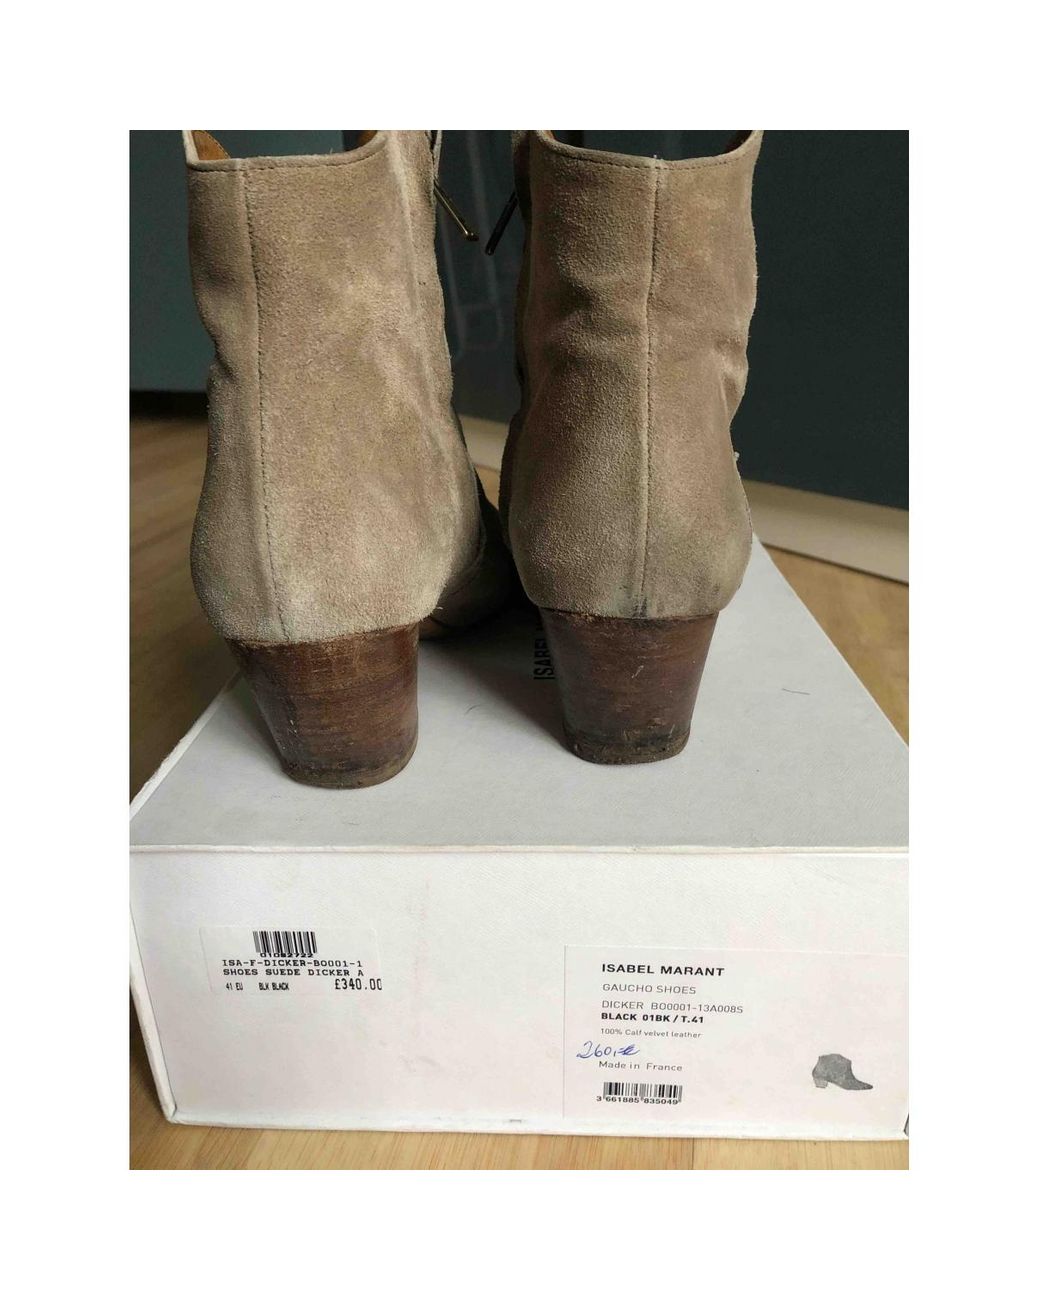 Isabel Marant Suede Dicker Boots in Beige (Natural) - Save 47% - Lyst